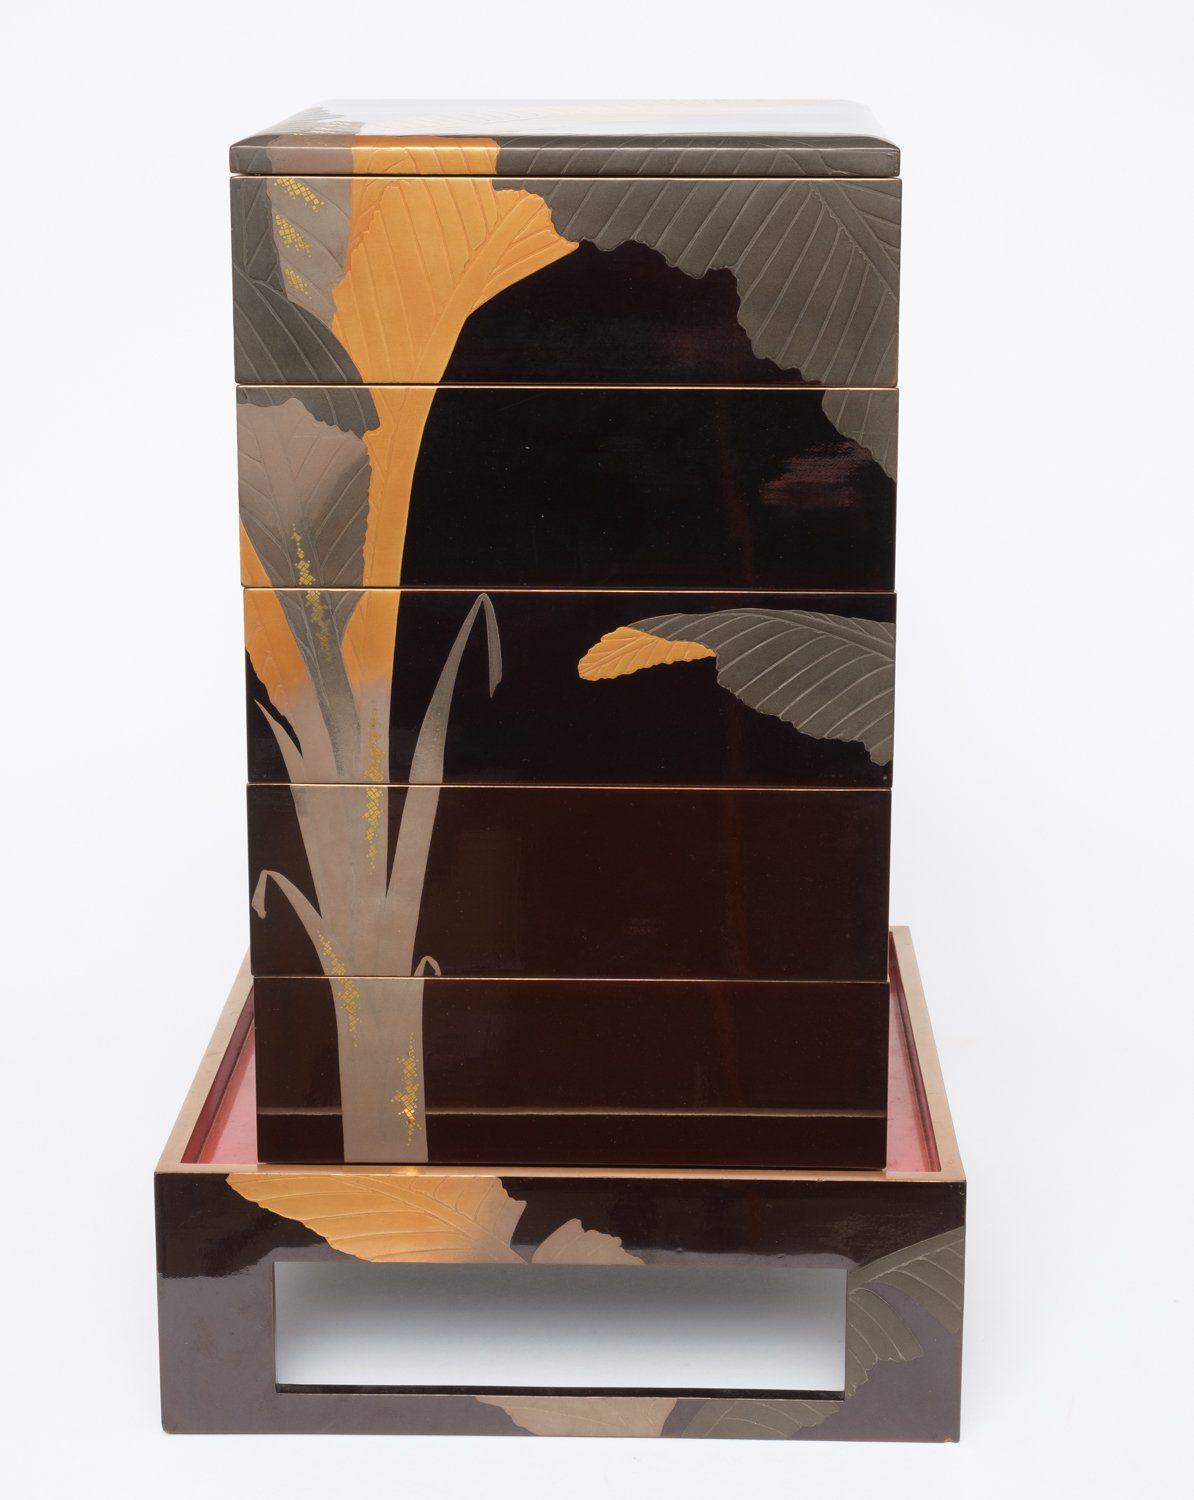 Japanese lacquered 5-tiered jûbako 重箱 (picnic box) with banana leaf design For Sale 4